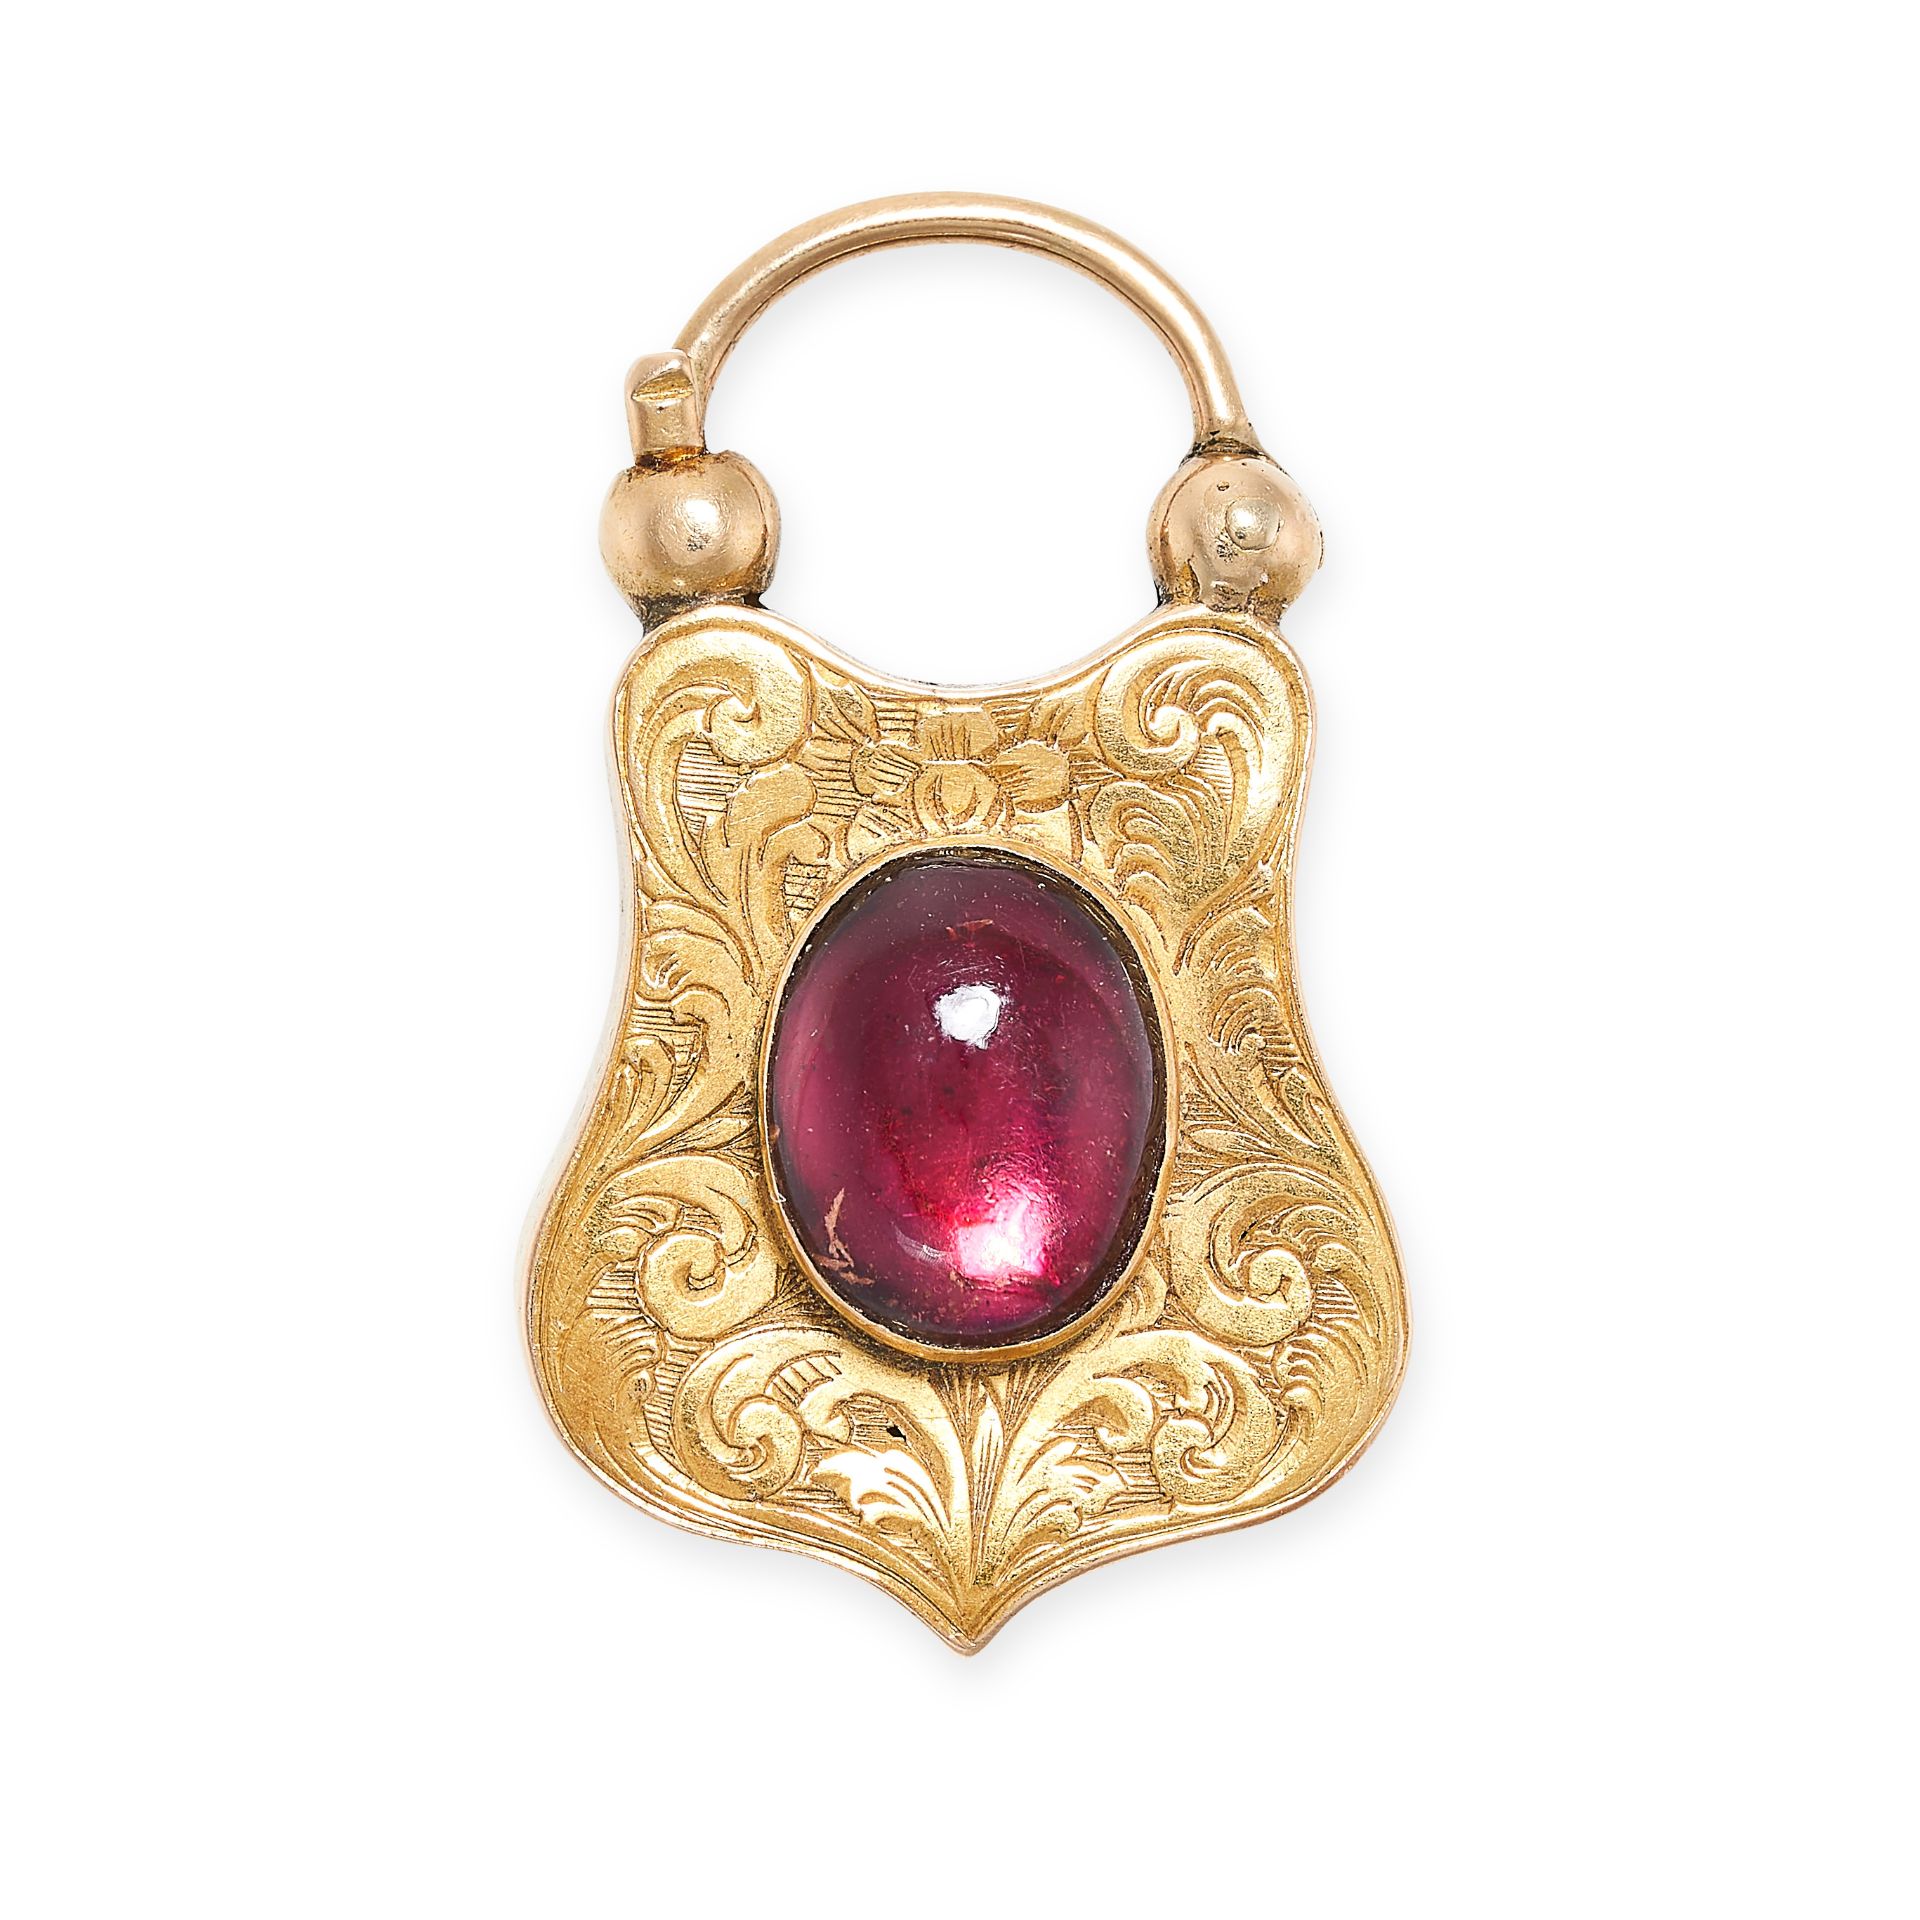 AN ANTIQUE MOURNING LOCKET SHIELD CLASP in high carat yellow gold, set with a foiled glass cabochon,